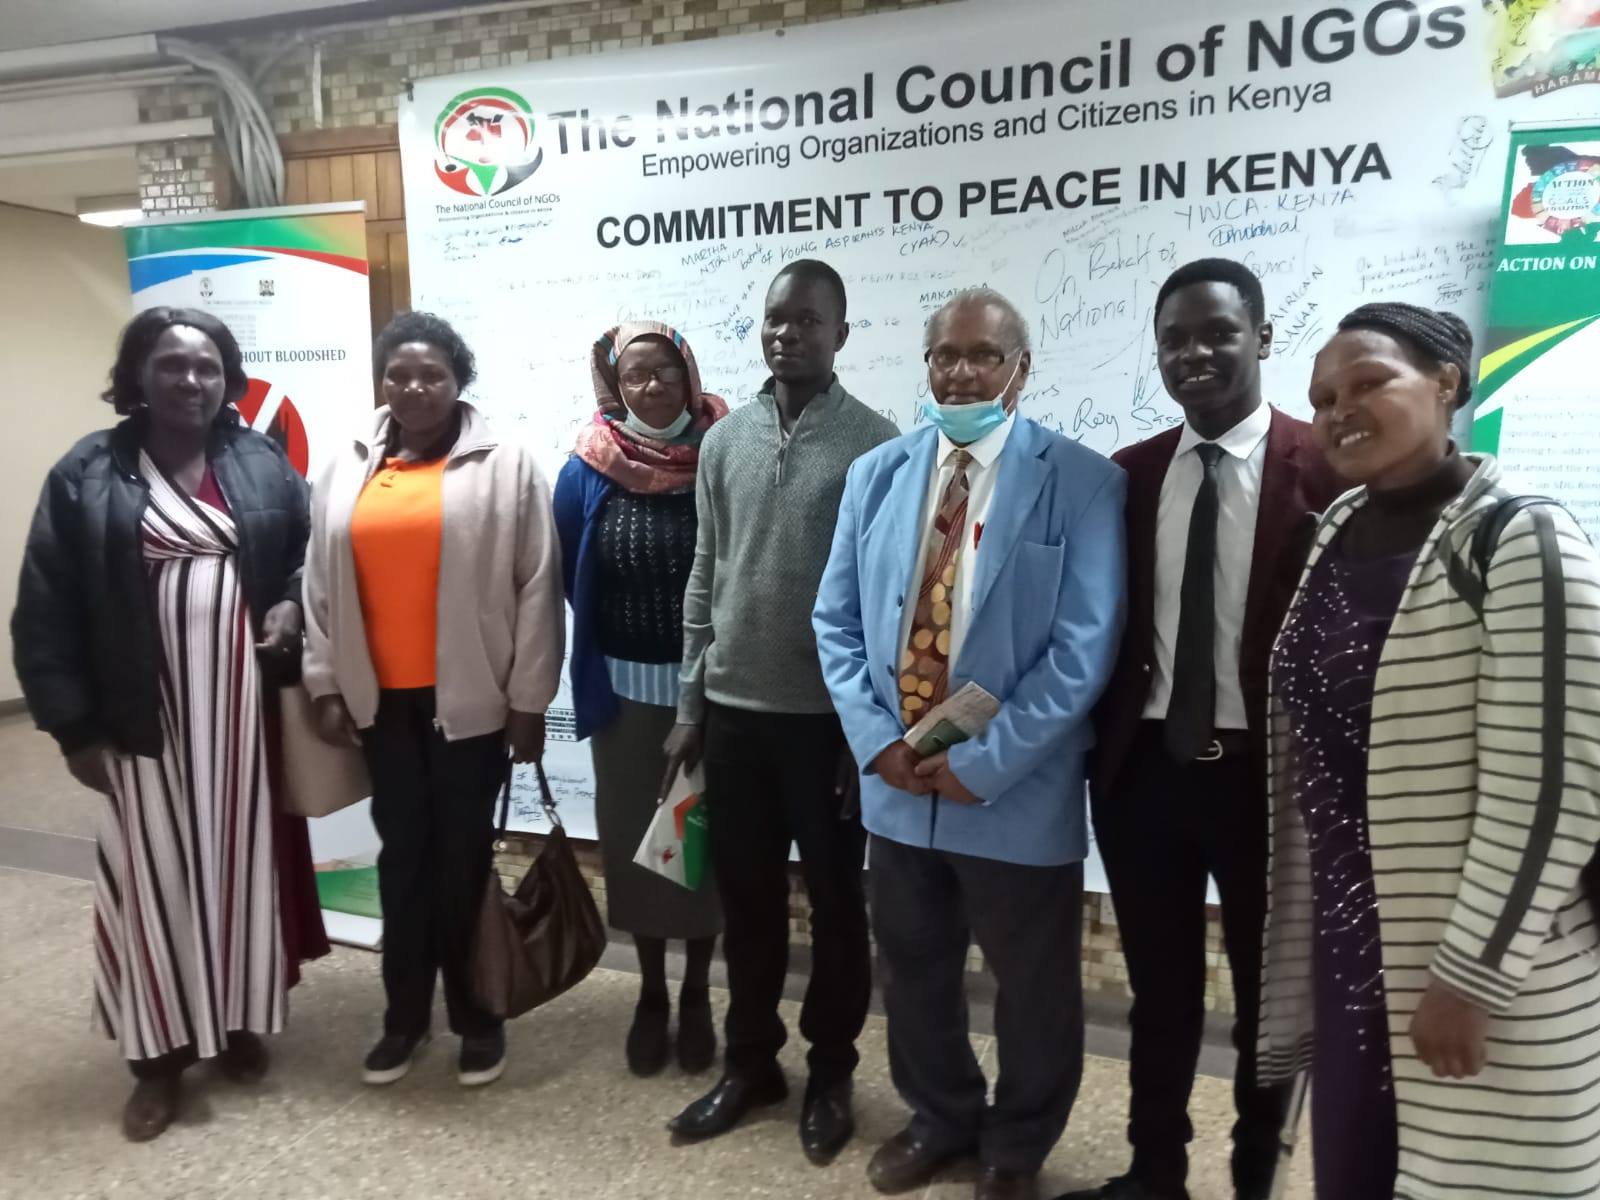 The National Council of NGOs Insists on Peaceful Election Campaigns